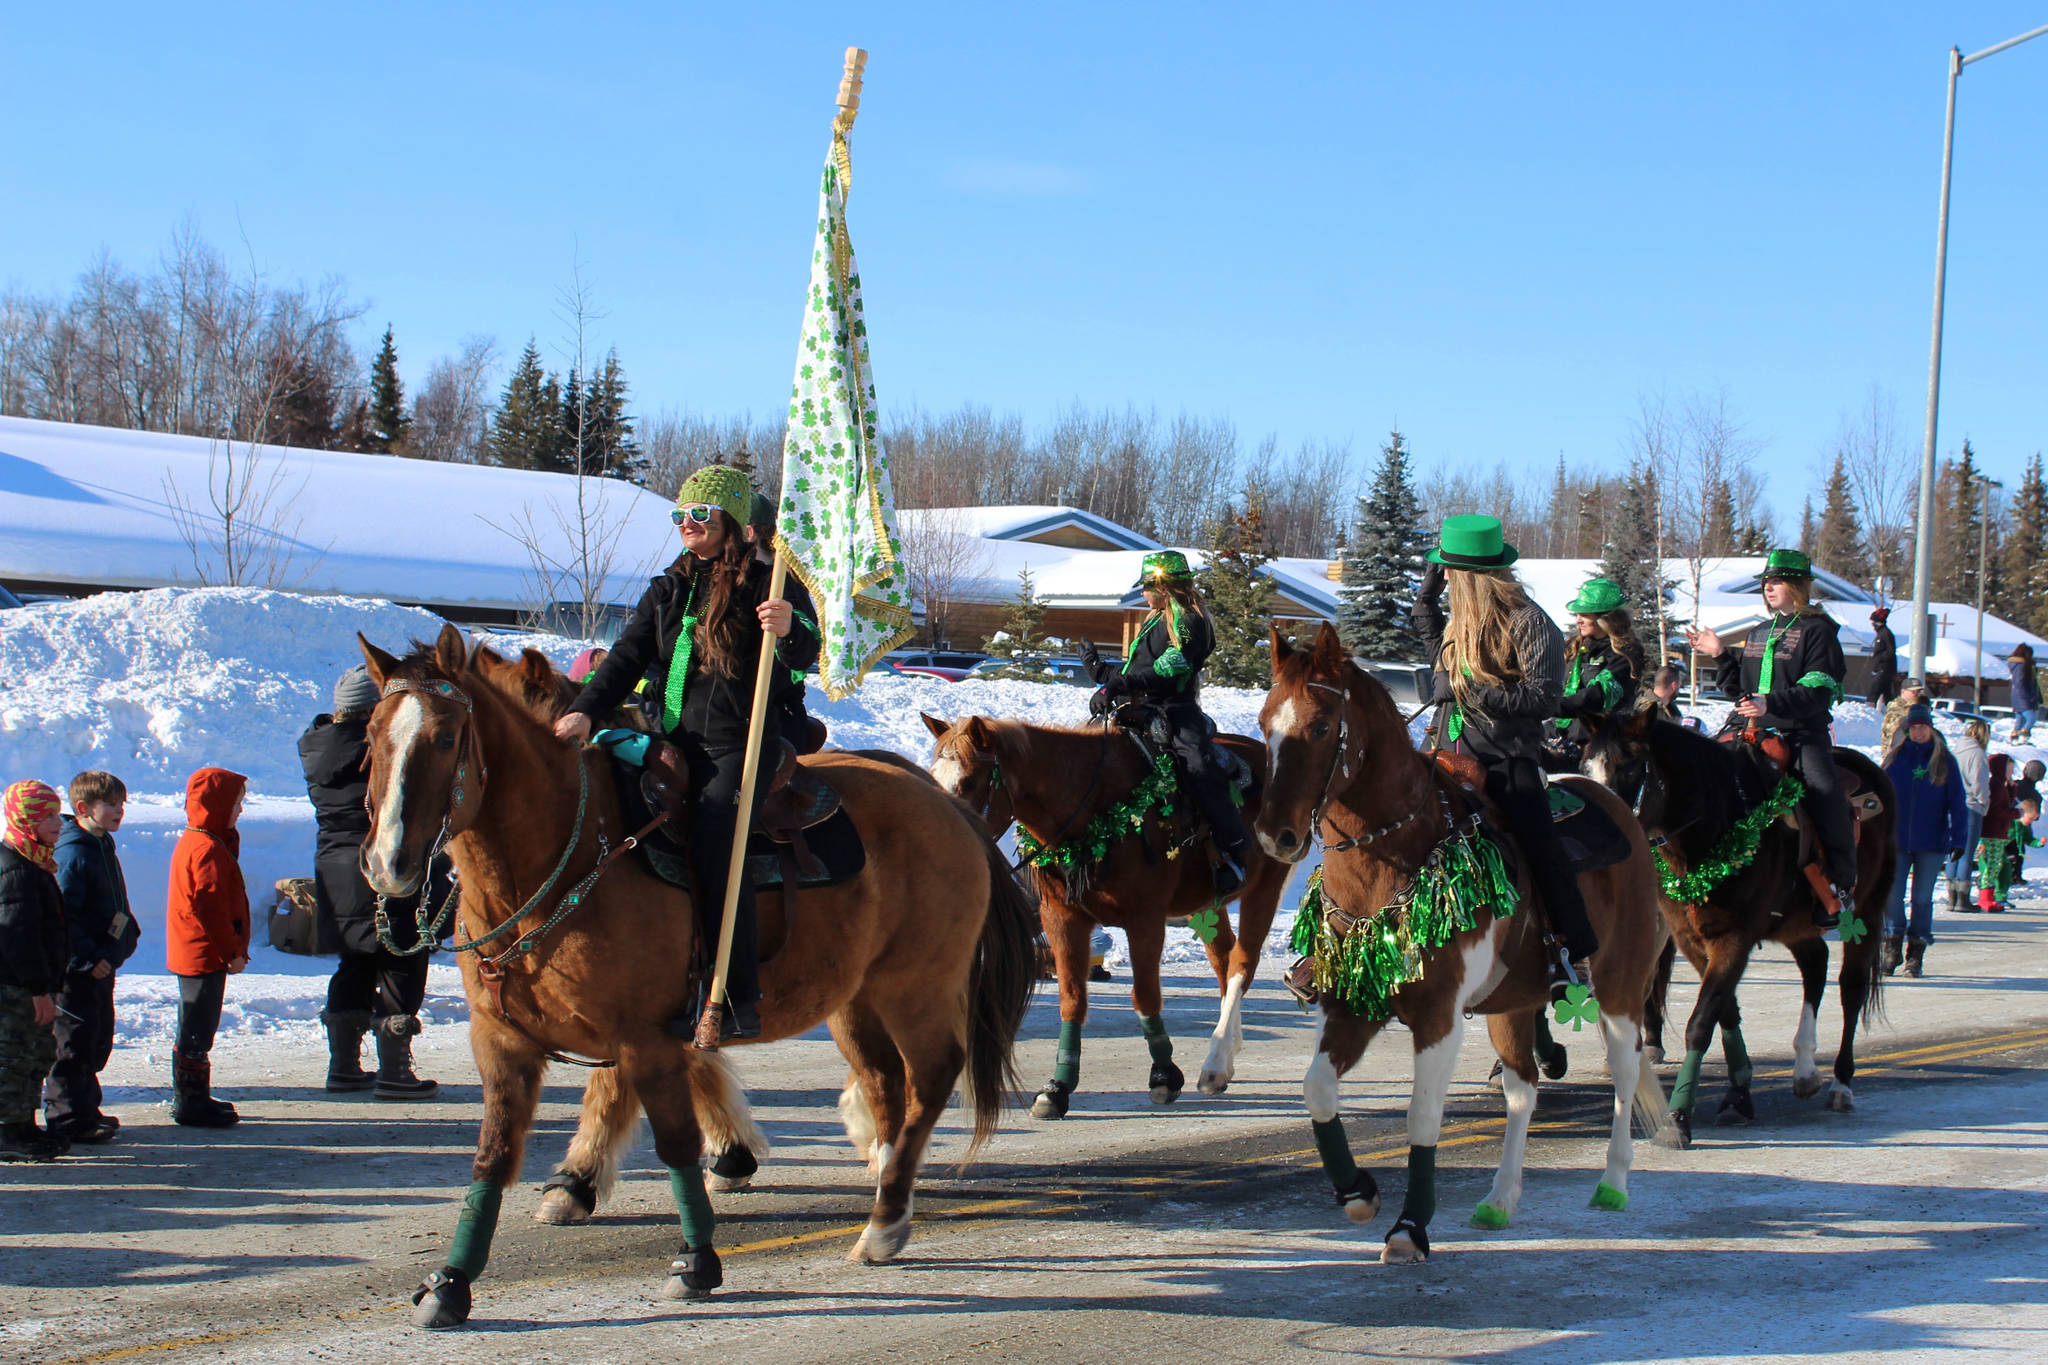 Riders with Alaska C&C Horse Adventures participate in the 30th Annual Sweeney’s St. Patrick’s Day Parade on Wednesday, March 17 in Soldotna, Alaska. (Ashlyn O’Hara/Peninsula Clarion)